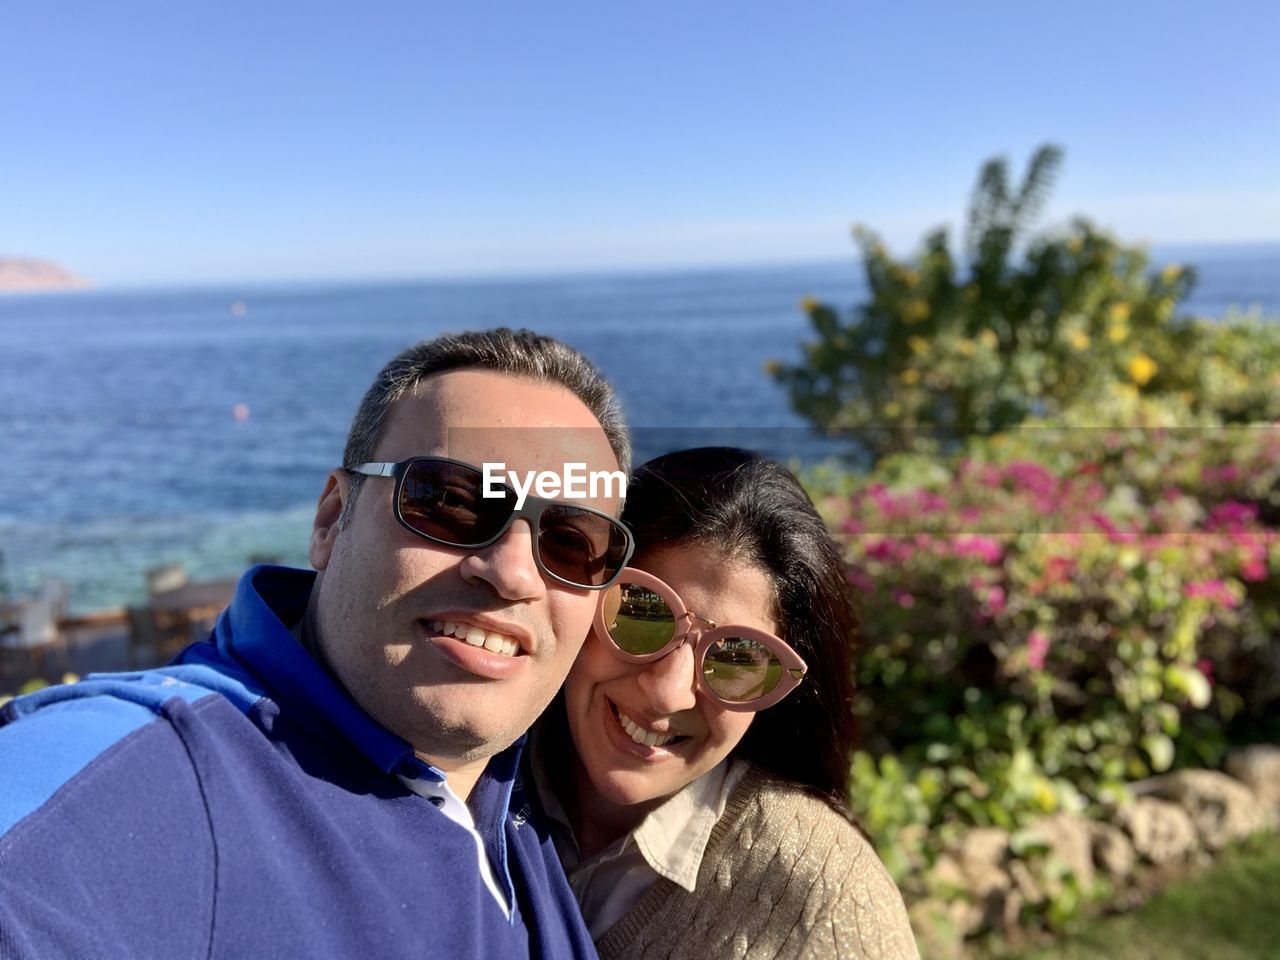 two people, adult, sunglasses, portrait, glasses, togetherness, smiling, happiness, vacation, men, emotion, nature, fashion, women, love, sea, sky, positive emotion, headshot, water, looking at camera, bonding, leisure activity, sunlight, day, female, sunny, blue, mature adult, outdoors, beach, casual clothing, lifestyles, person, holiday, land, trip, young adult, plant, cheerful, human face, clear sky, focus on foreground, affectionate, enjoyment, romance, embracing, front view, summer, friendship, travel destinations, beauty in nature, travel, relaxation, copy space